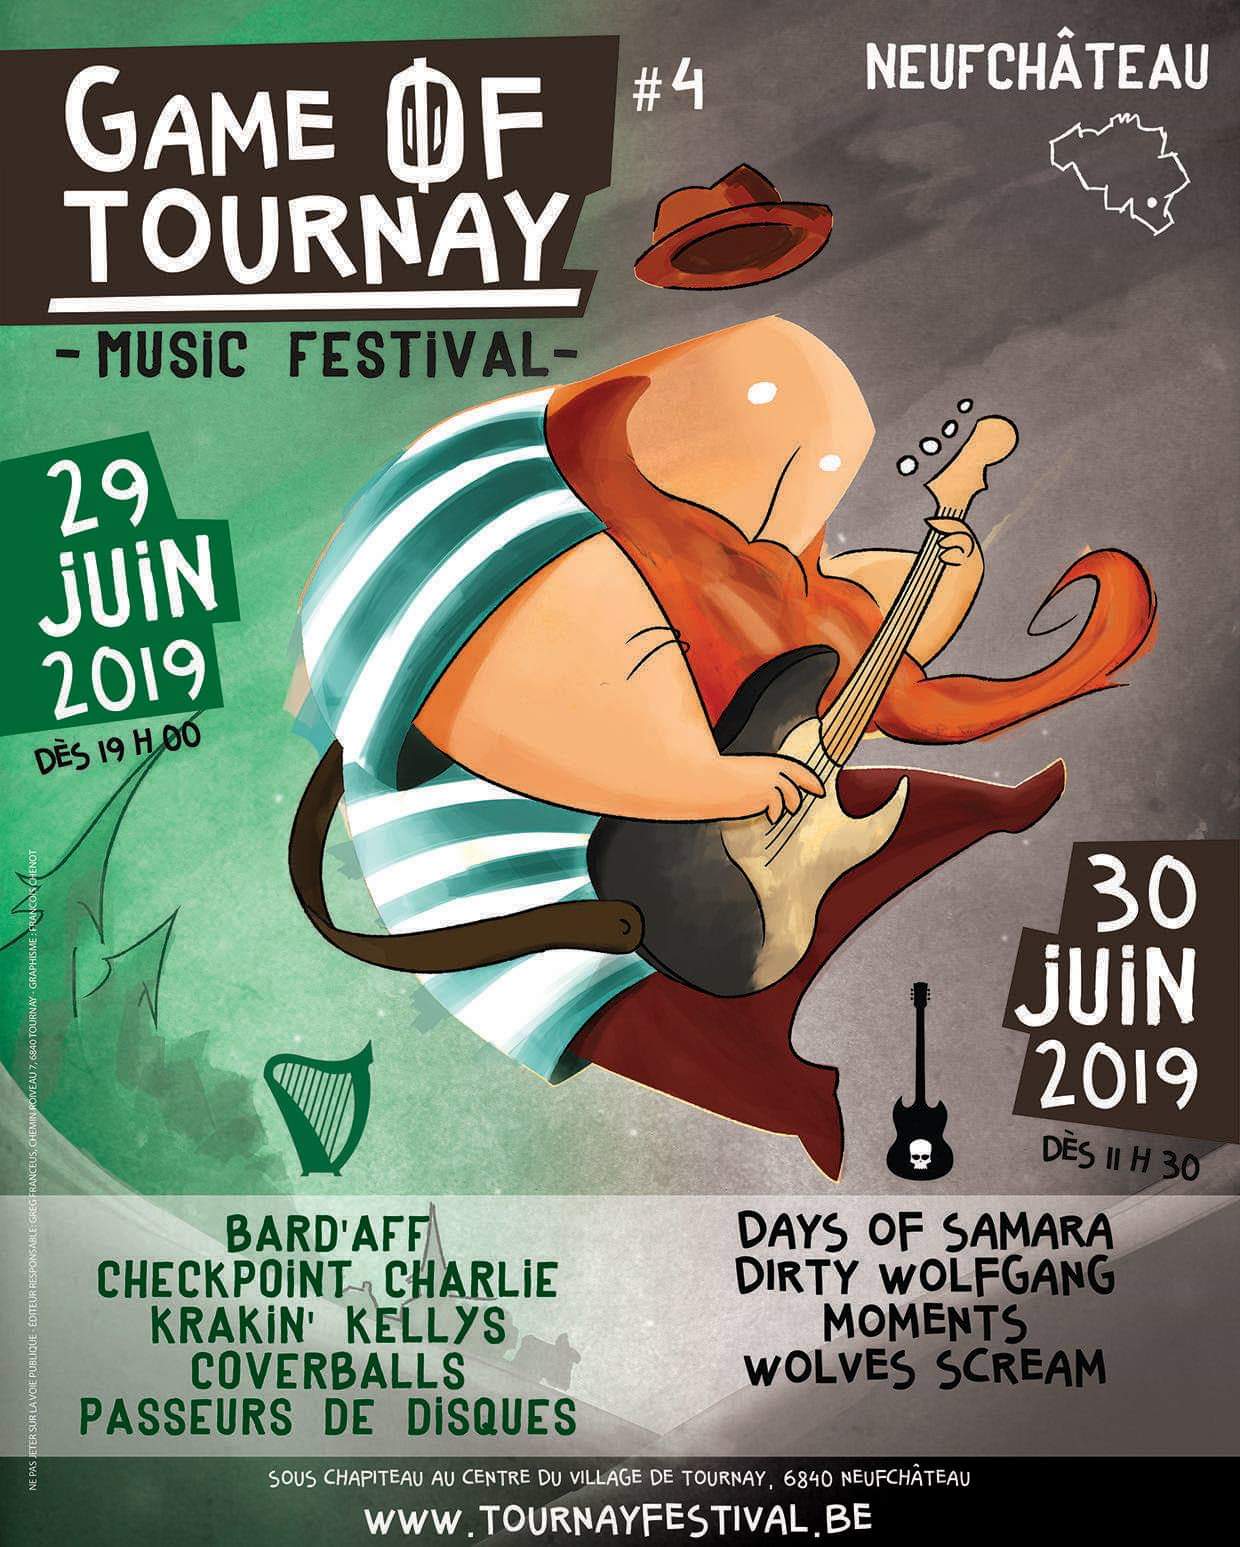  Festival musical Game Of Tournay Neufchâteau 